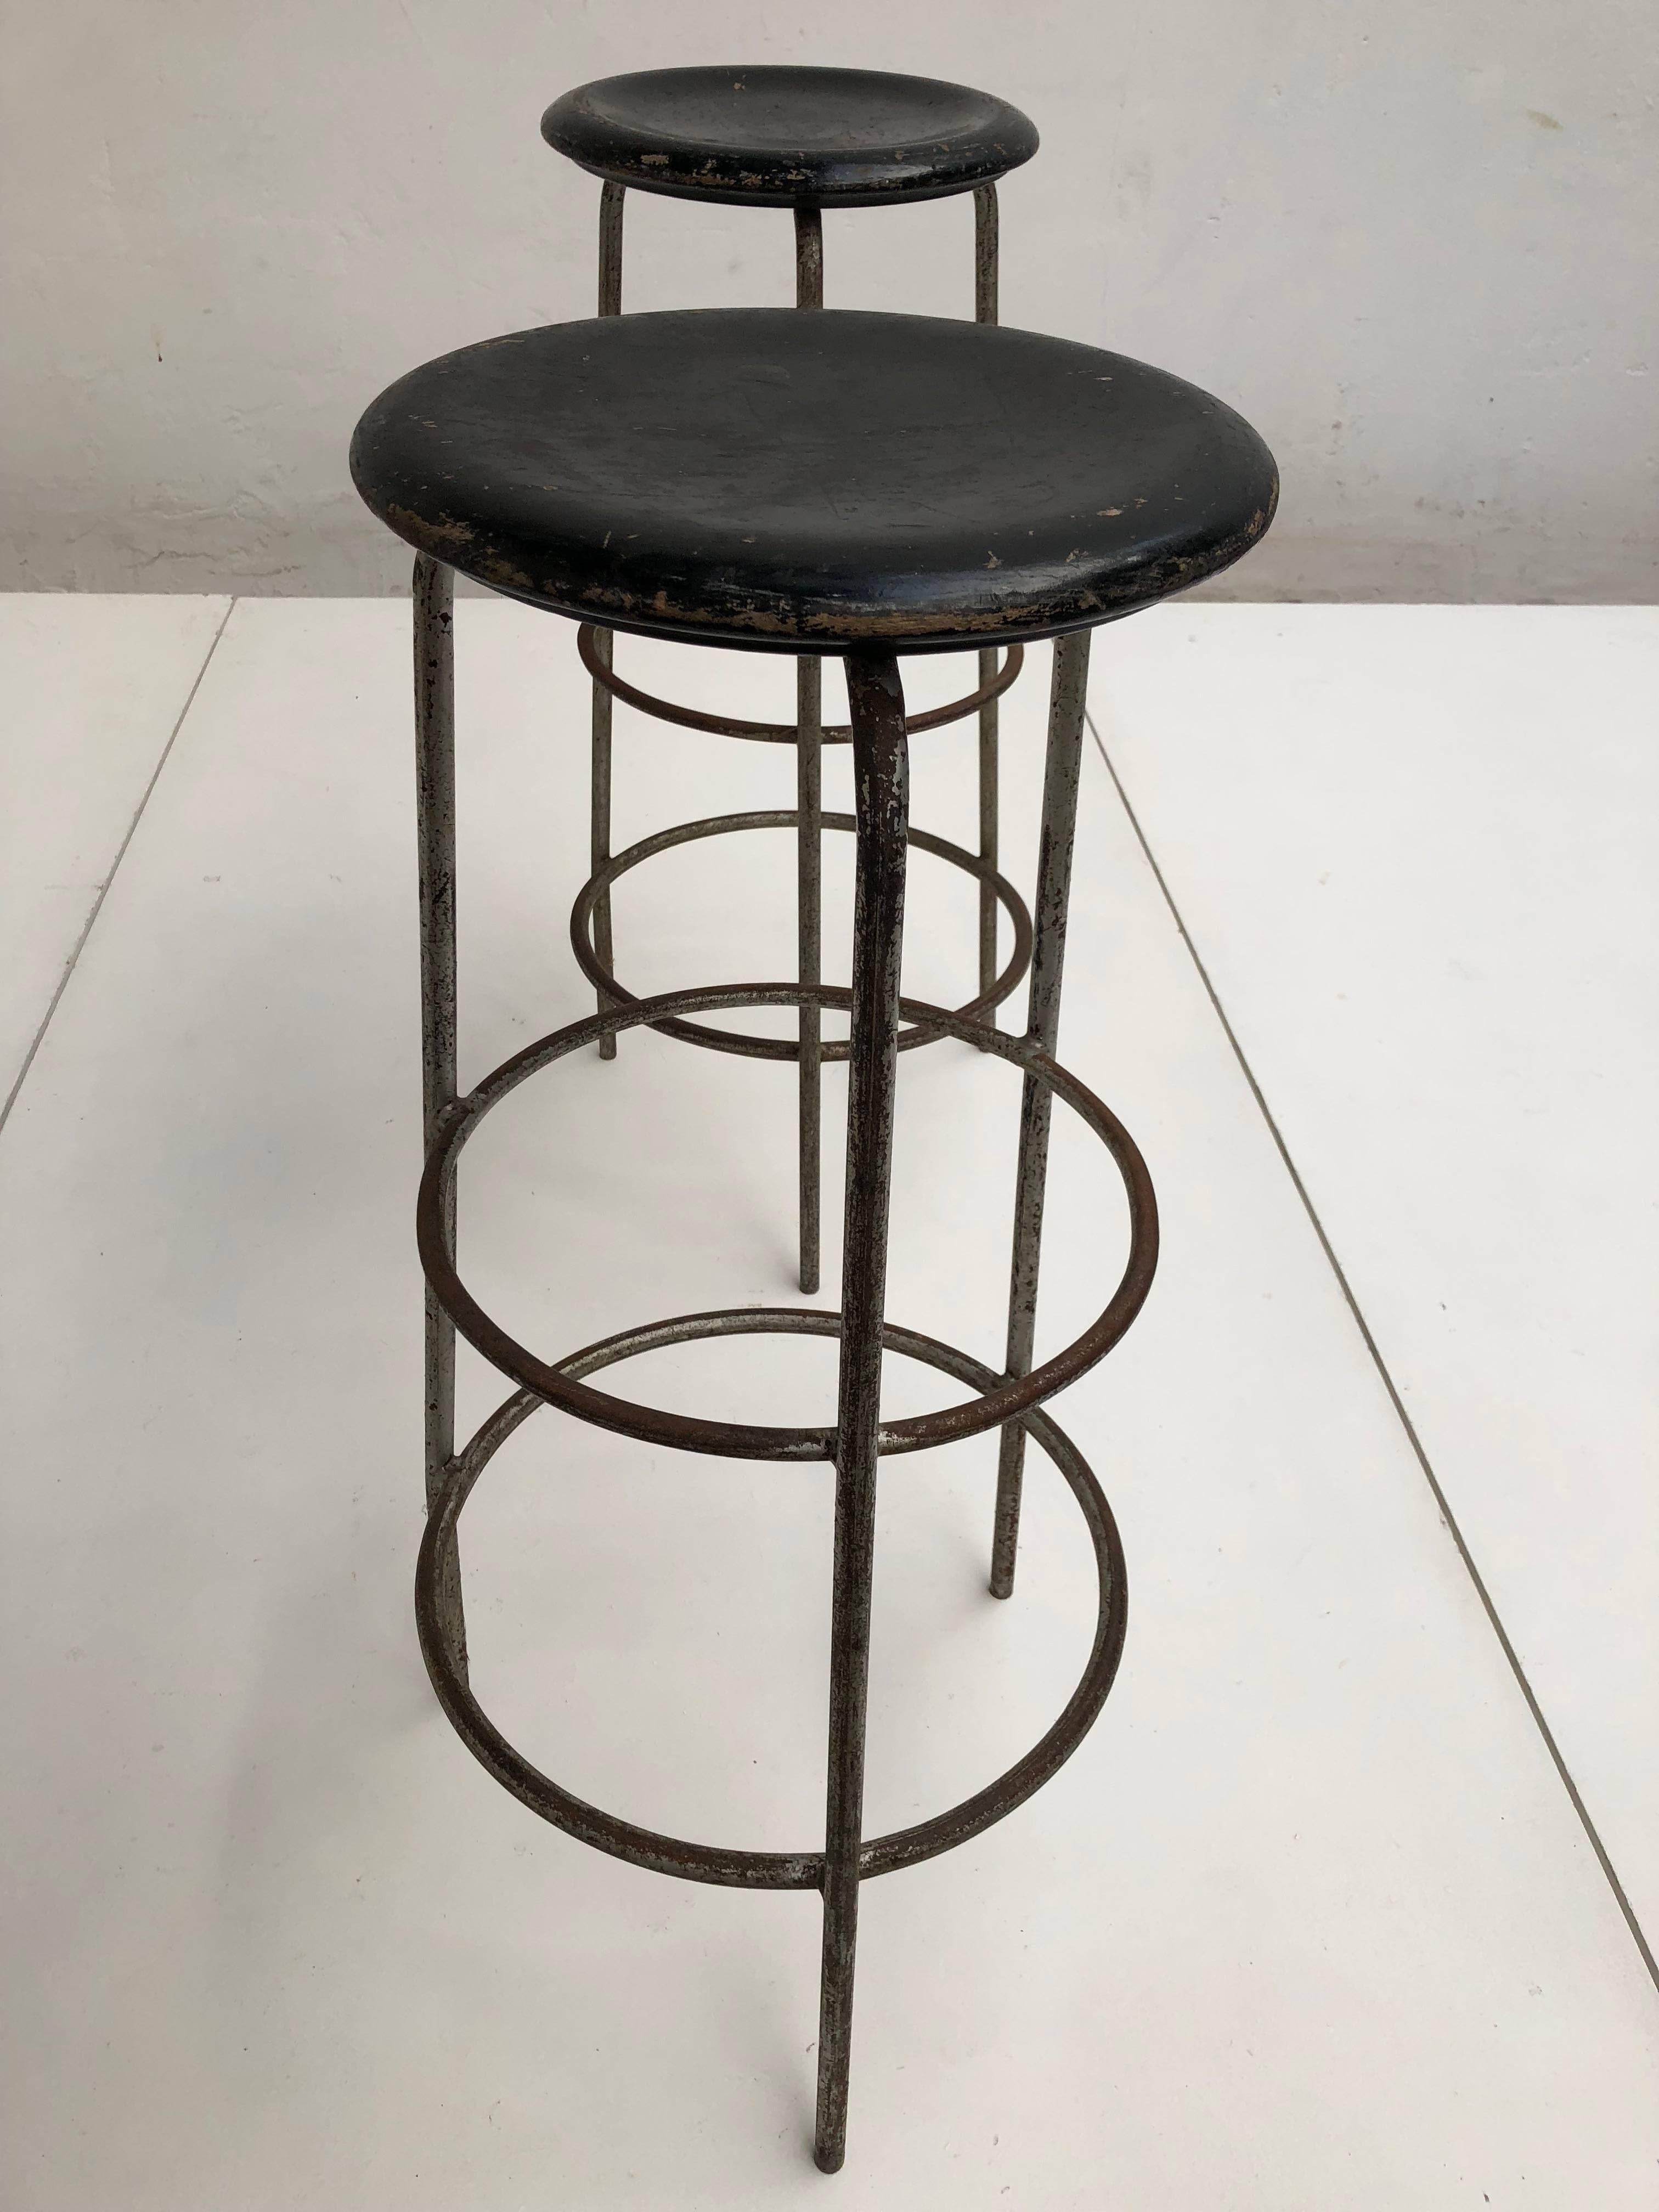 Pair of high working / bar stools that originated from a Swiss confection atelier 

Carved black lacquered wooden round seating on tubular steel grey enamelled legs

This pair of stools have a lovely old and aged patina from user wear consistent